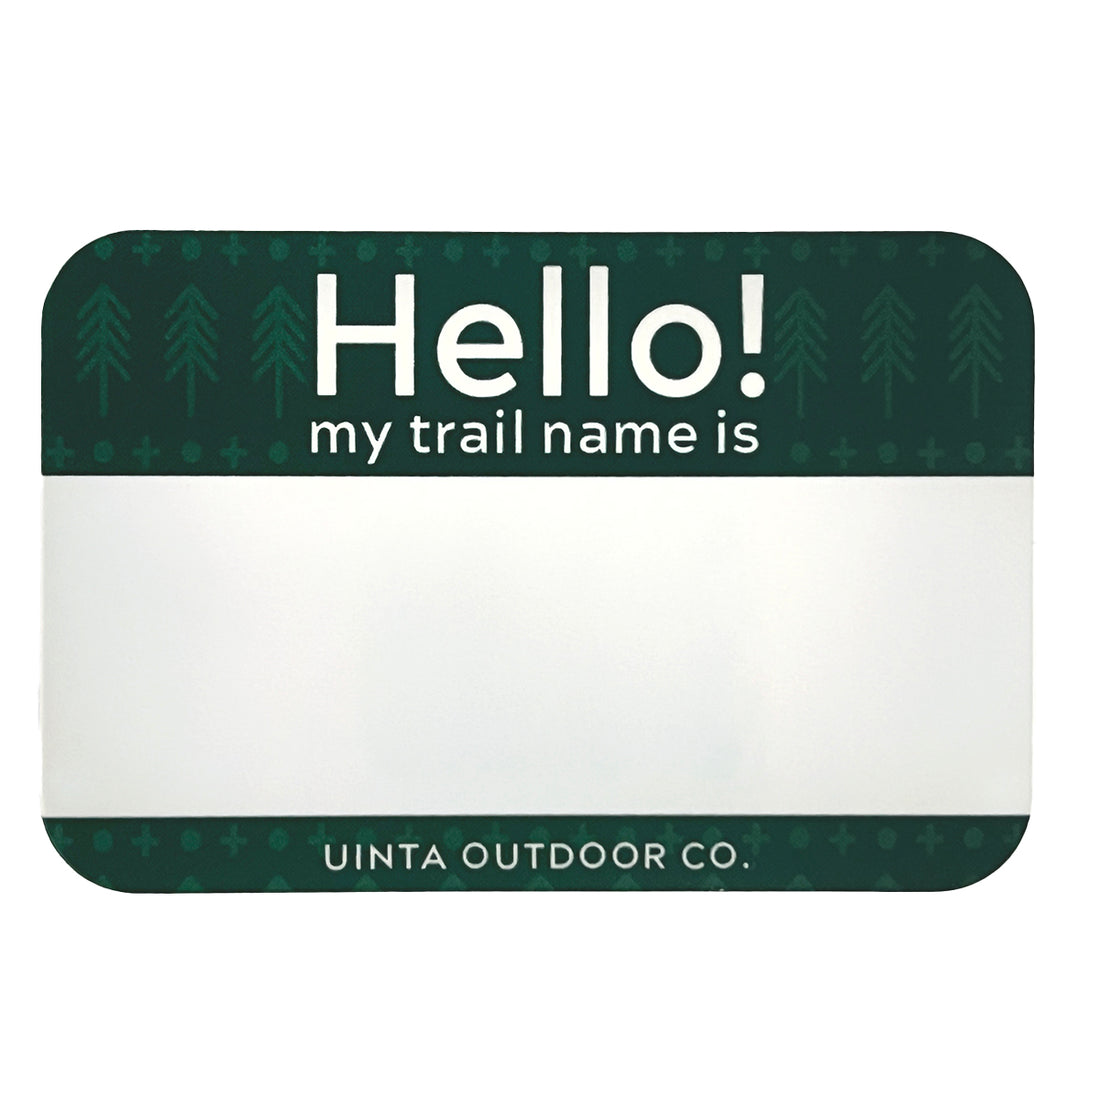 Hello! My trail name is... name card sticker. With green and white background.